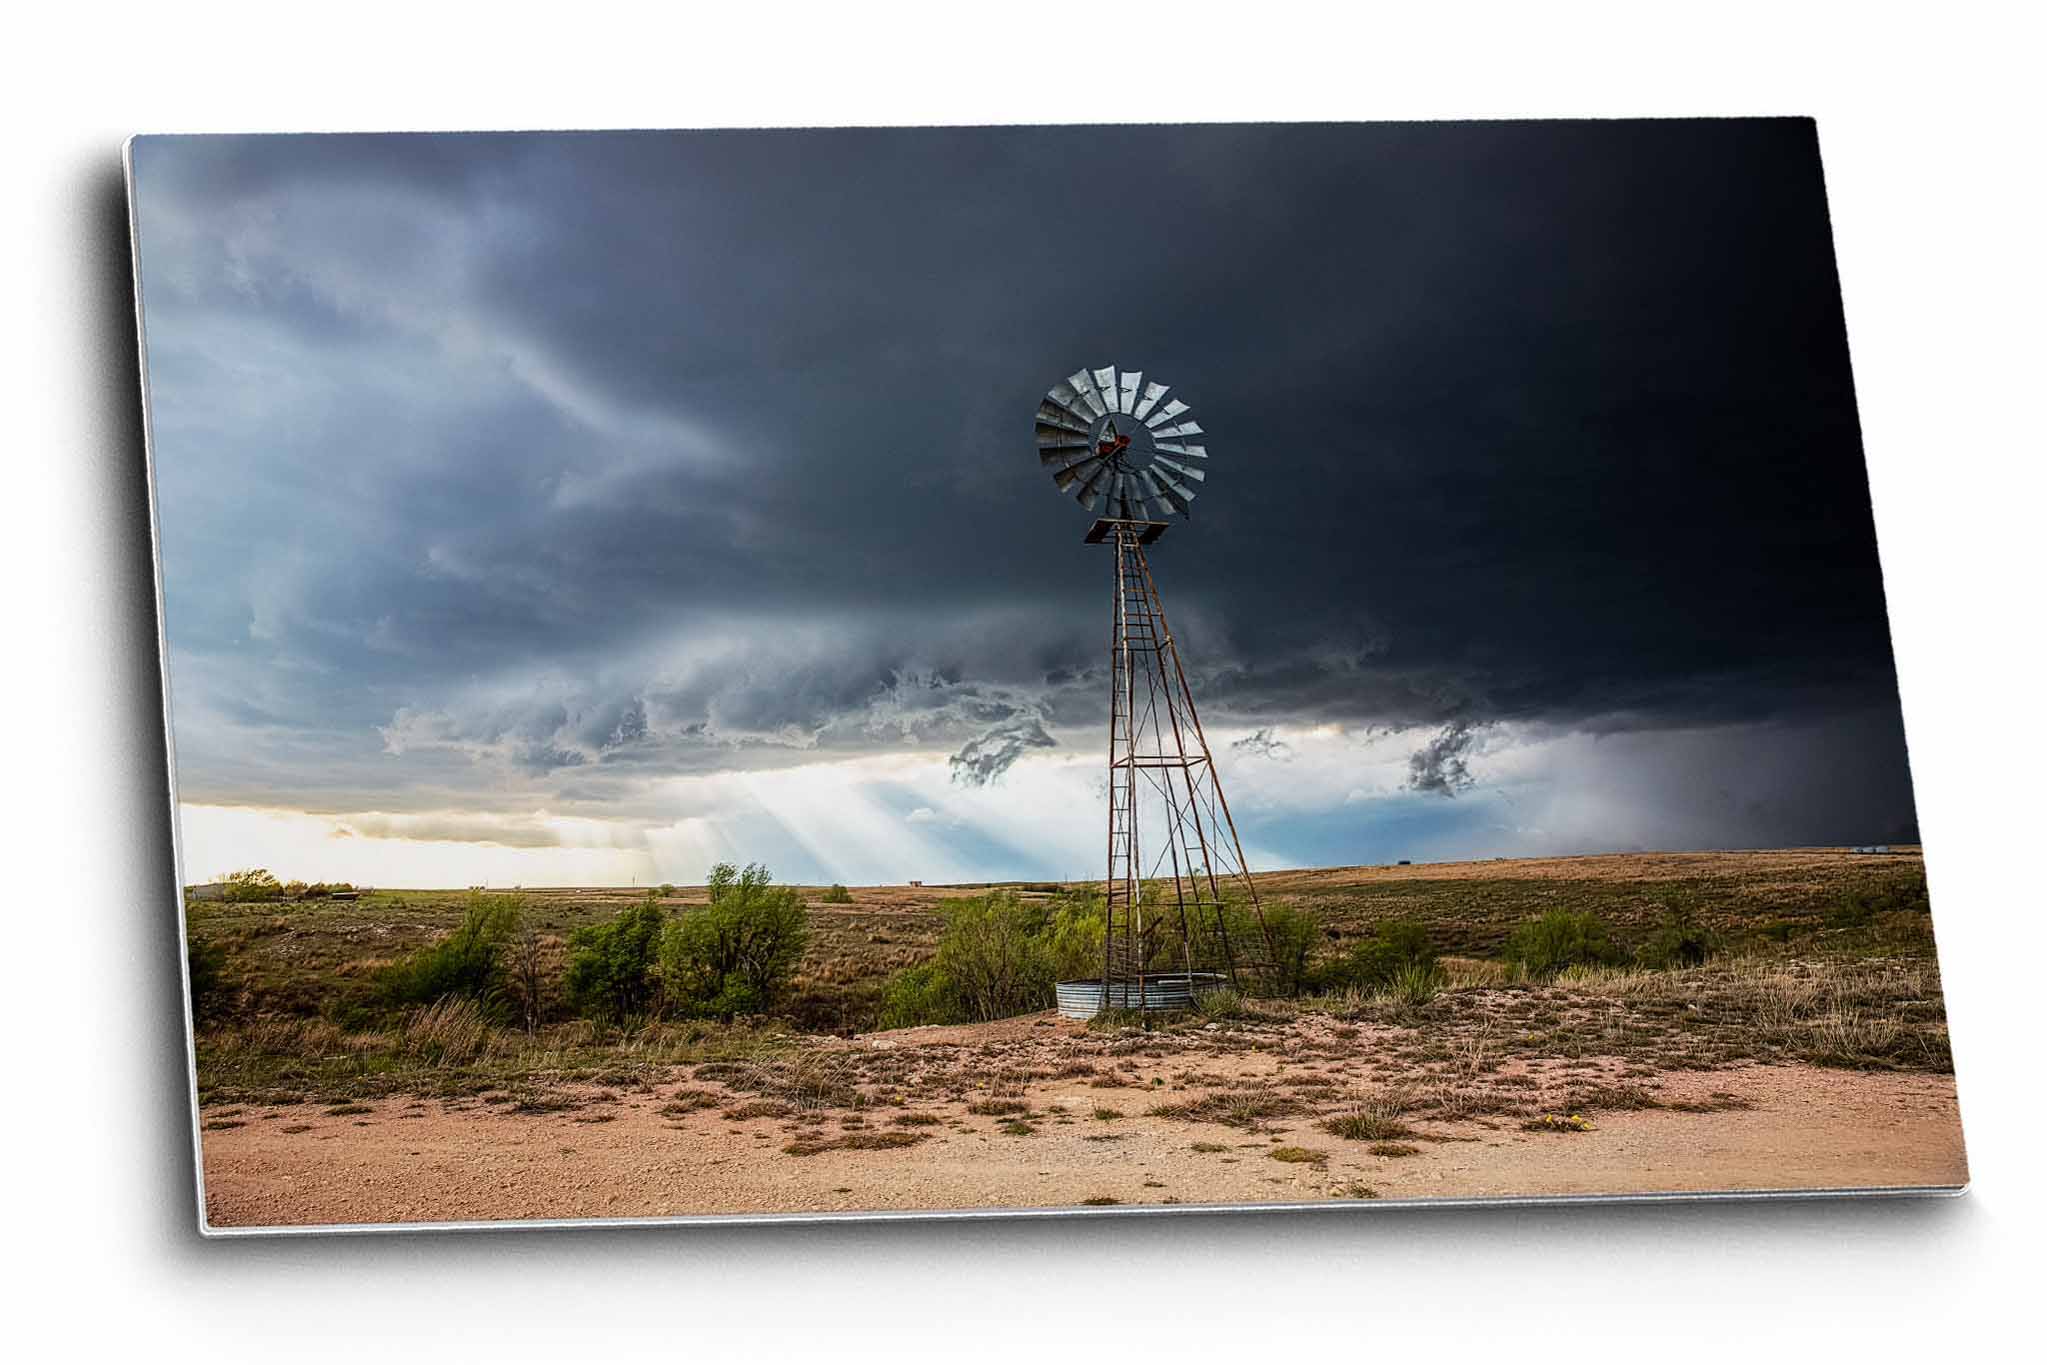 Country aluminum metal print wall art of sunbeams breaking through an intense storm as an Aermotor windmill stands tall over the prairie landscape on a spring day in Texas by Sean Ramsey of Southern Plains Photography.